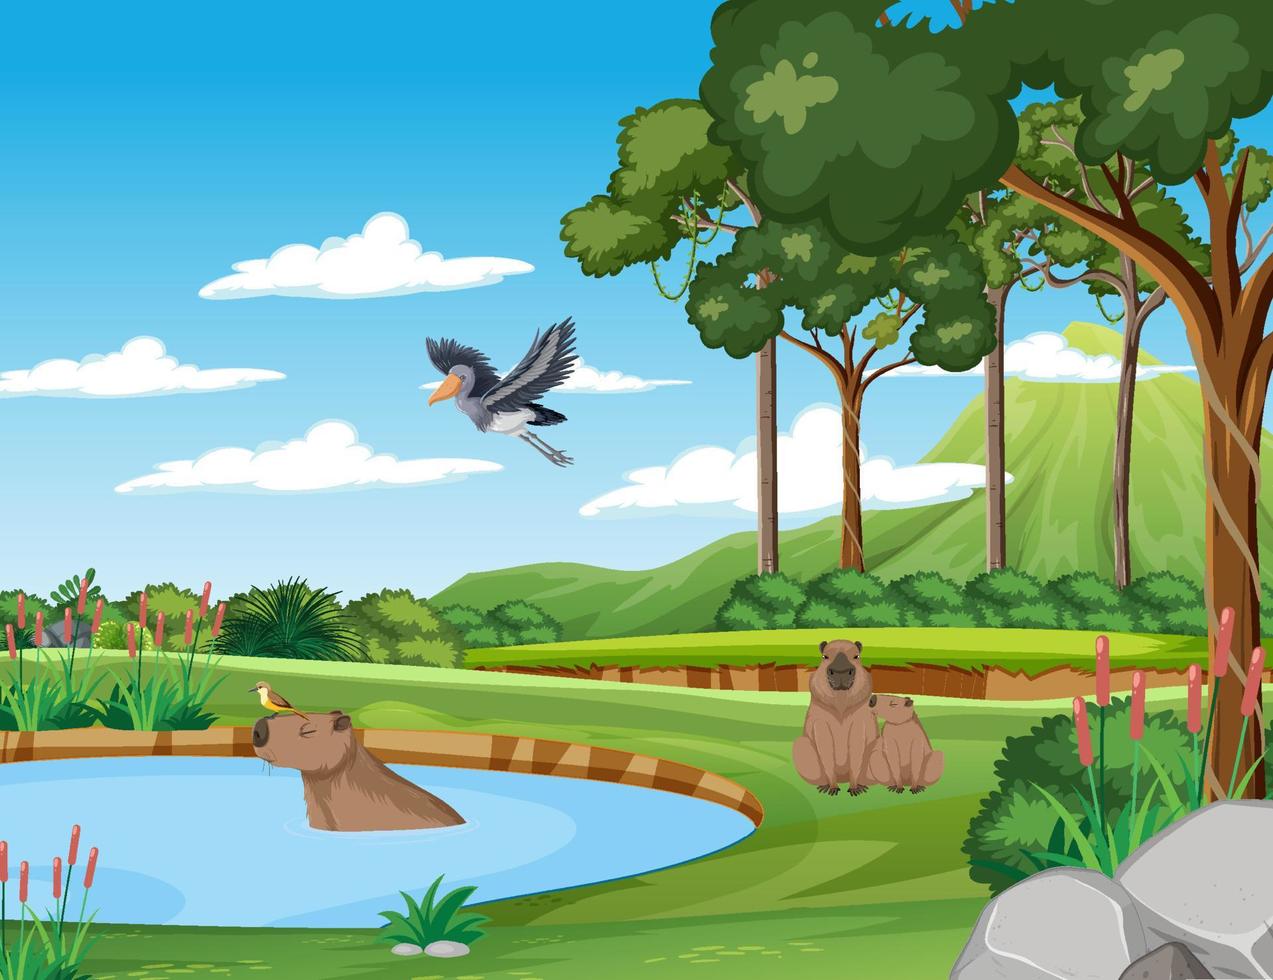 Scene with wild animals in the forest vector